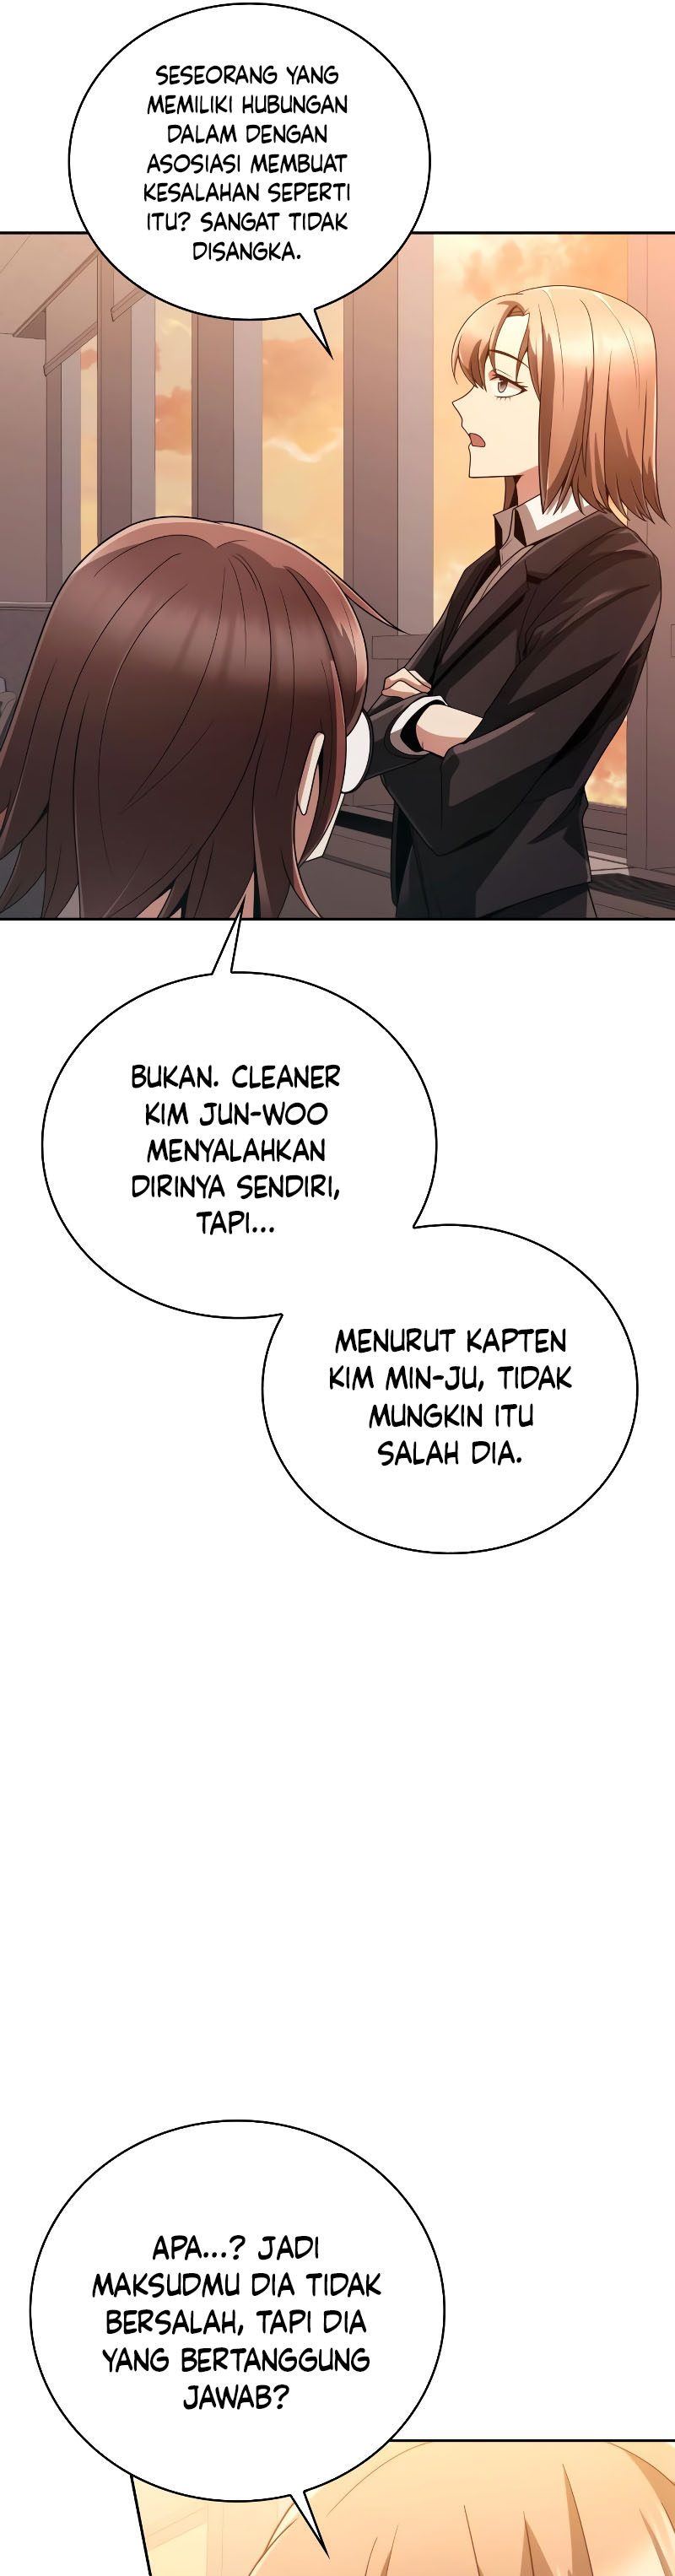 Dilarang COPAS - situs resmi www.mangacanblog.com - Komik clever cleaning life of the returned genius hunter 020 - chapter 20 21 Indonesia clever cleaning life of the returned genius hunter 020 - chapter 20 Terbaru 13|Baca Manga Komik Indonesia|Mangacan